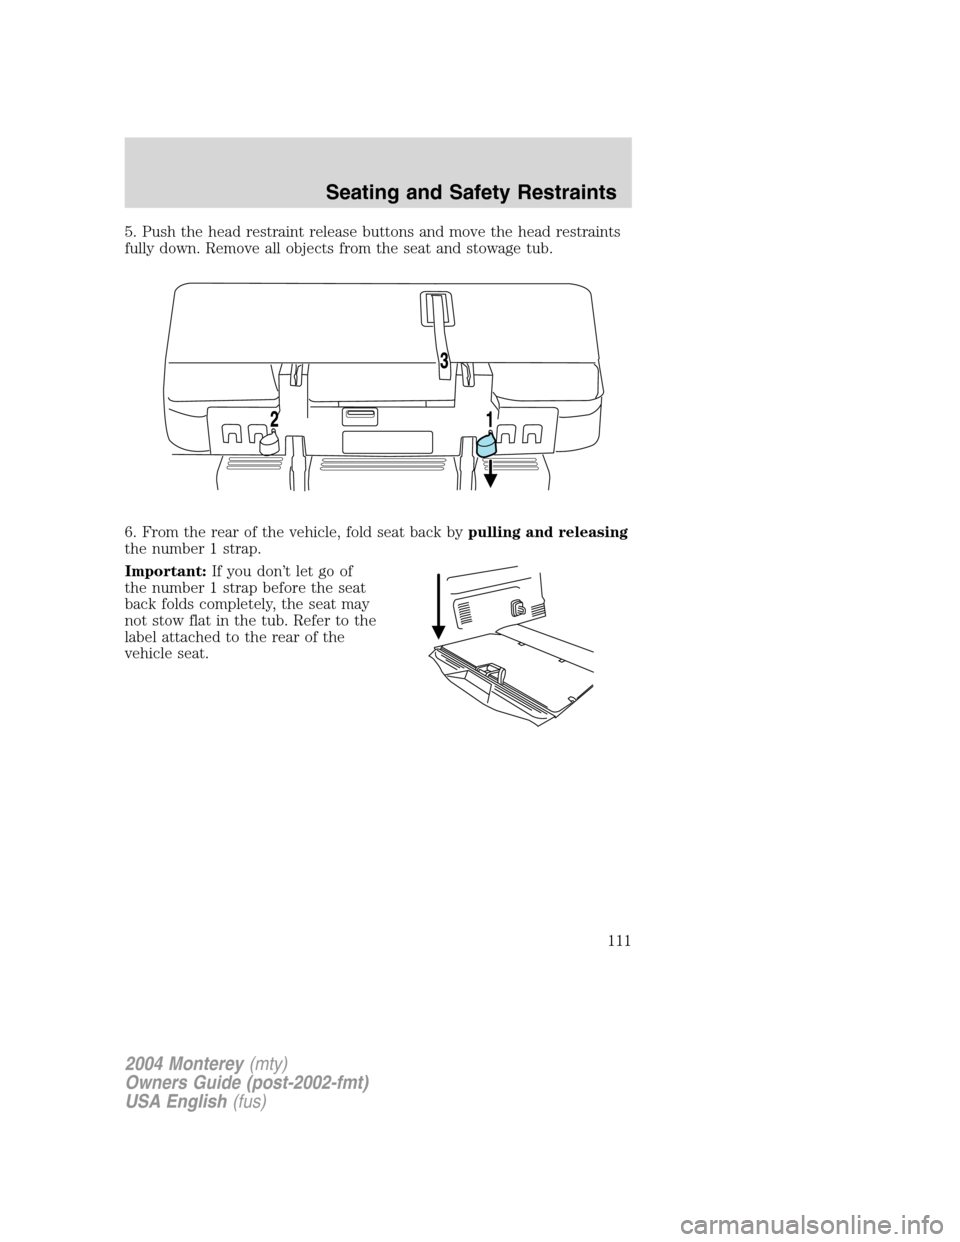 Mercury Monterey 2004  Owners Manuals 5. Push the head restraint release buttons and move the head restraints
fully down. Remove all objects from the seat and stowage tub.
6. From the rear of the vehicle, fold seat back bypulling and rele